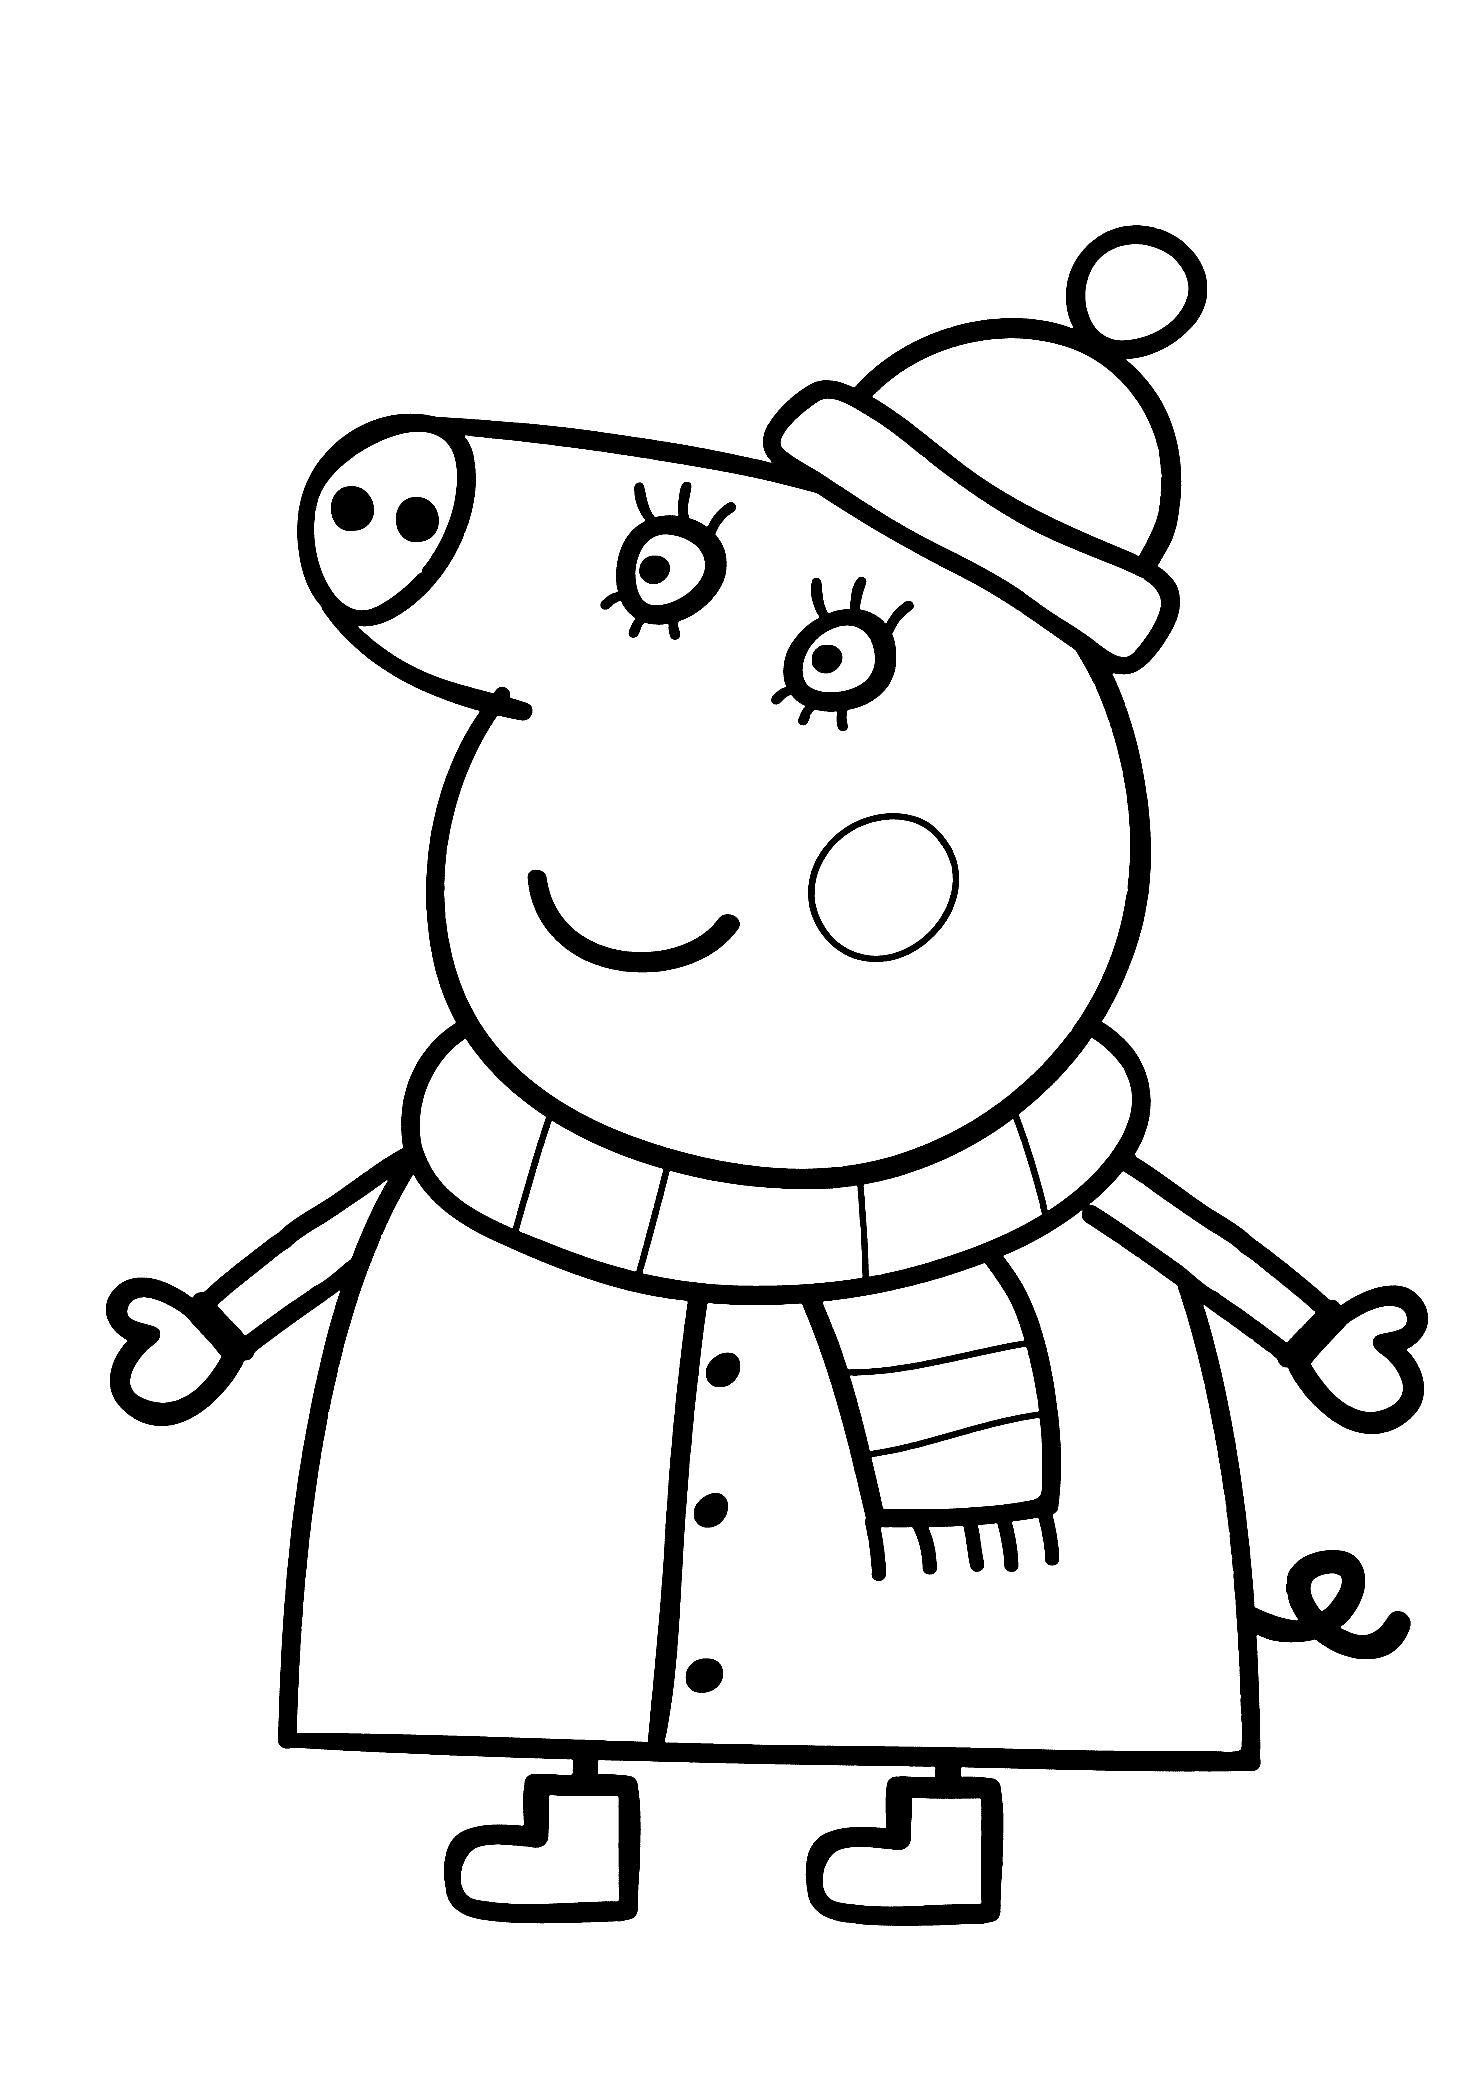 Peppa Pig Free Coloring Book | High Quality Coloring Pages